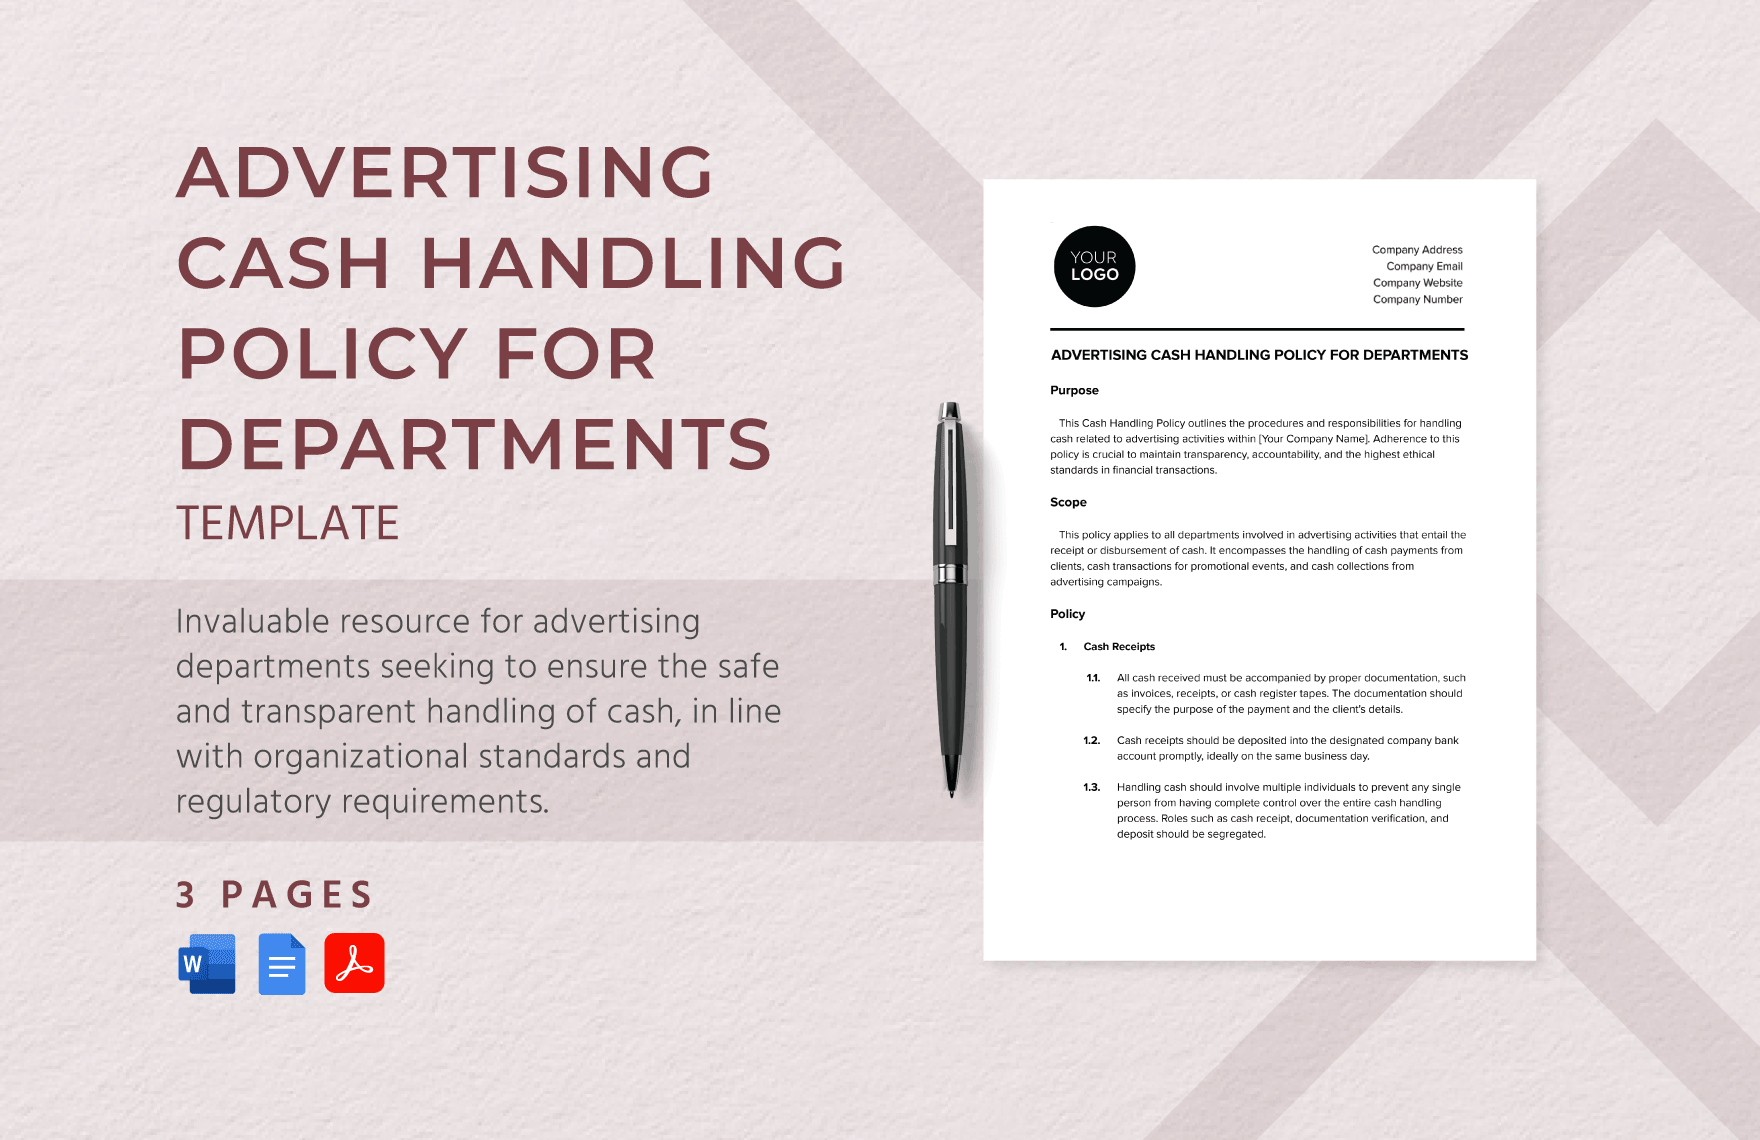 Advertising Cash Handling Policy for Departments Template